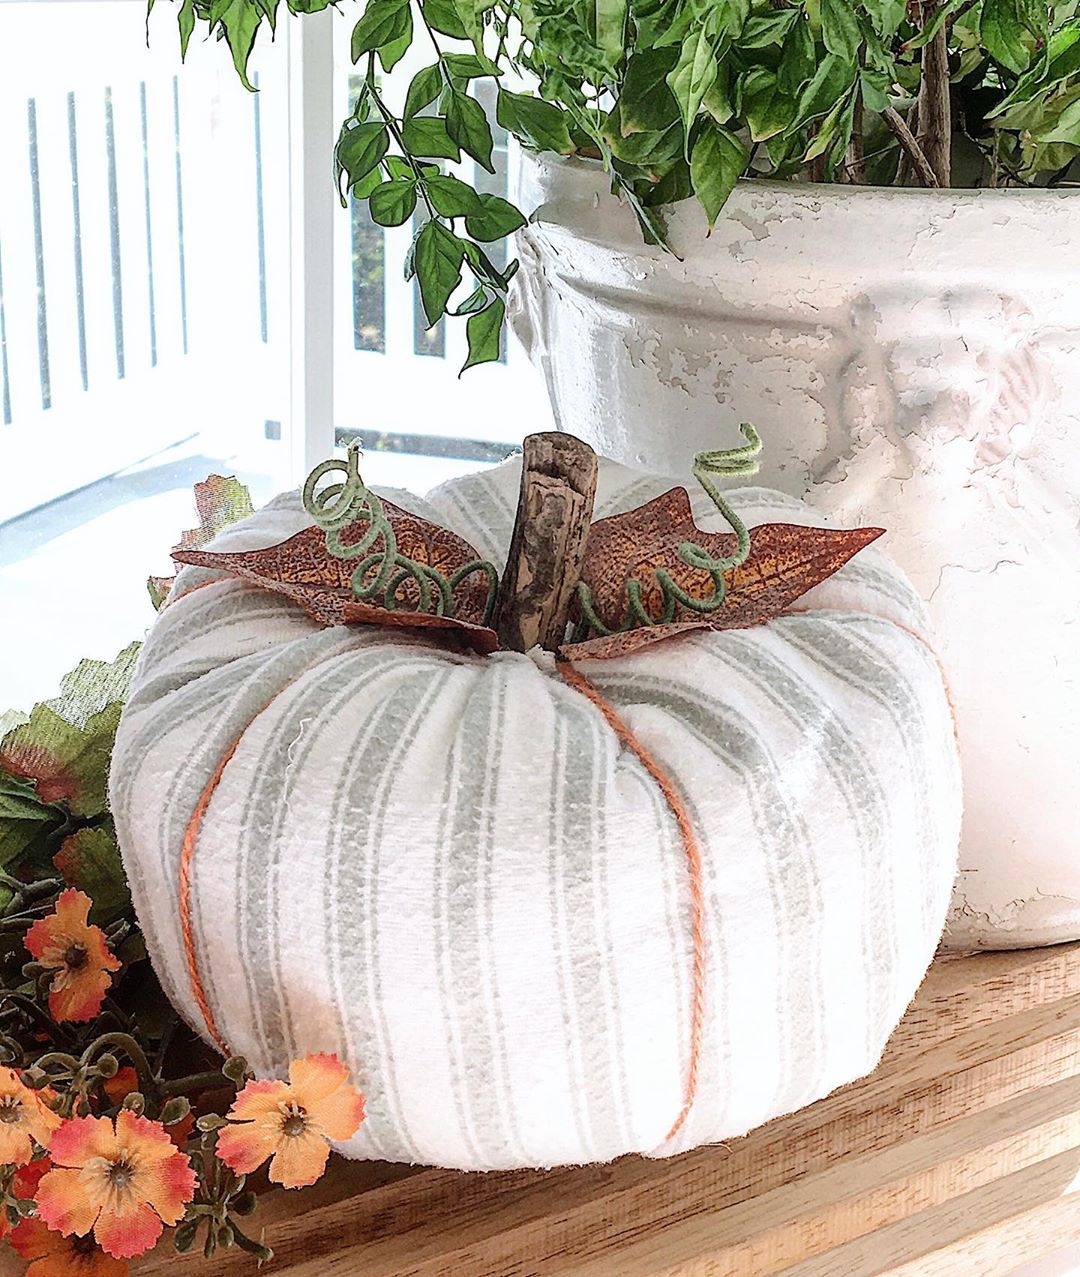 Cloth Pumpkin On a Front Porch. Photo by Instagram user @passionateforwhite